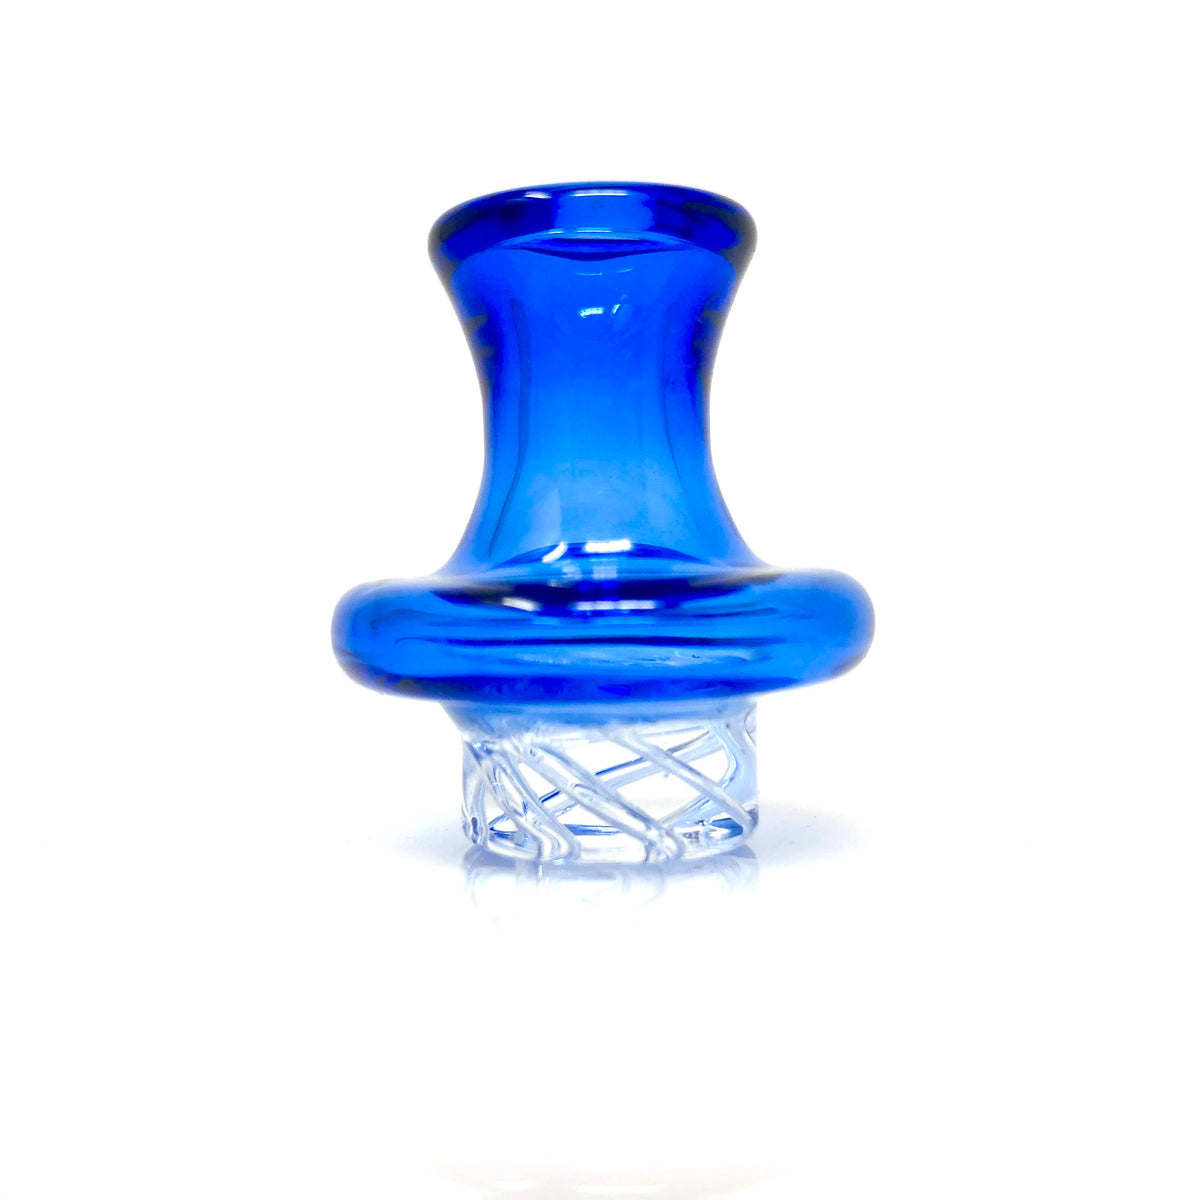 AFM Color Turbo Spinner Glass Carb Cap + 2 Pearls